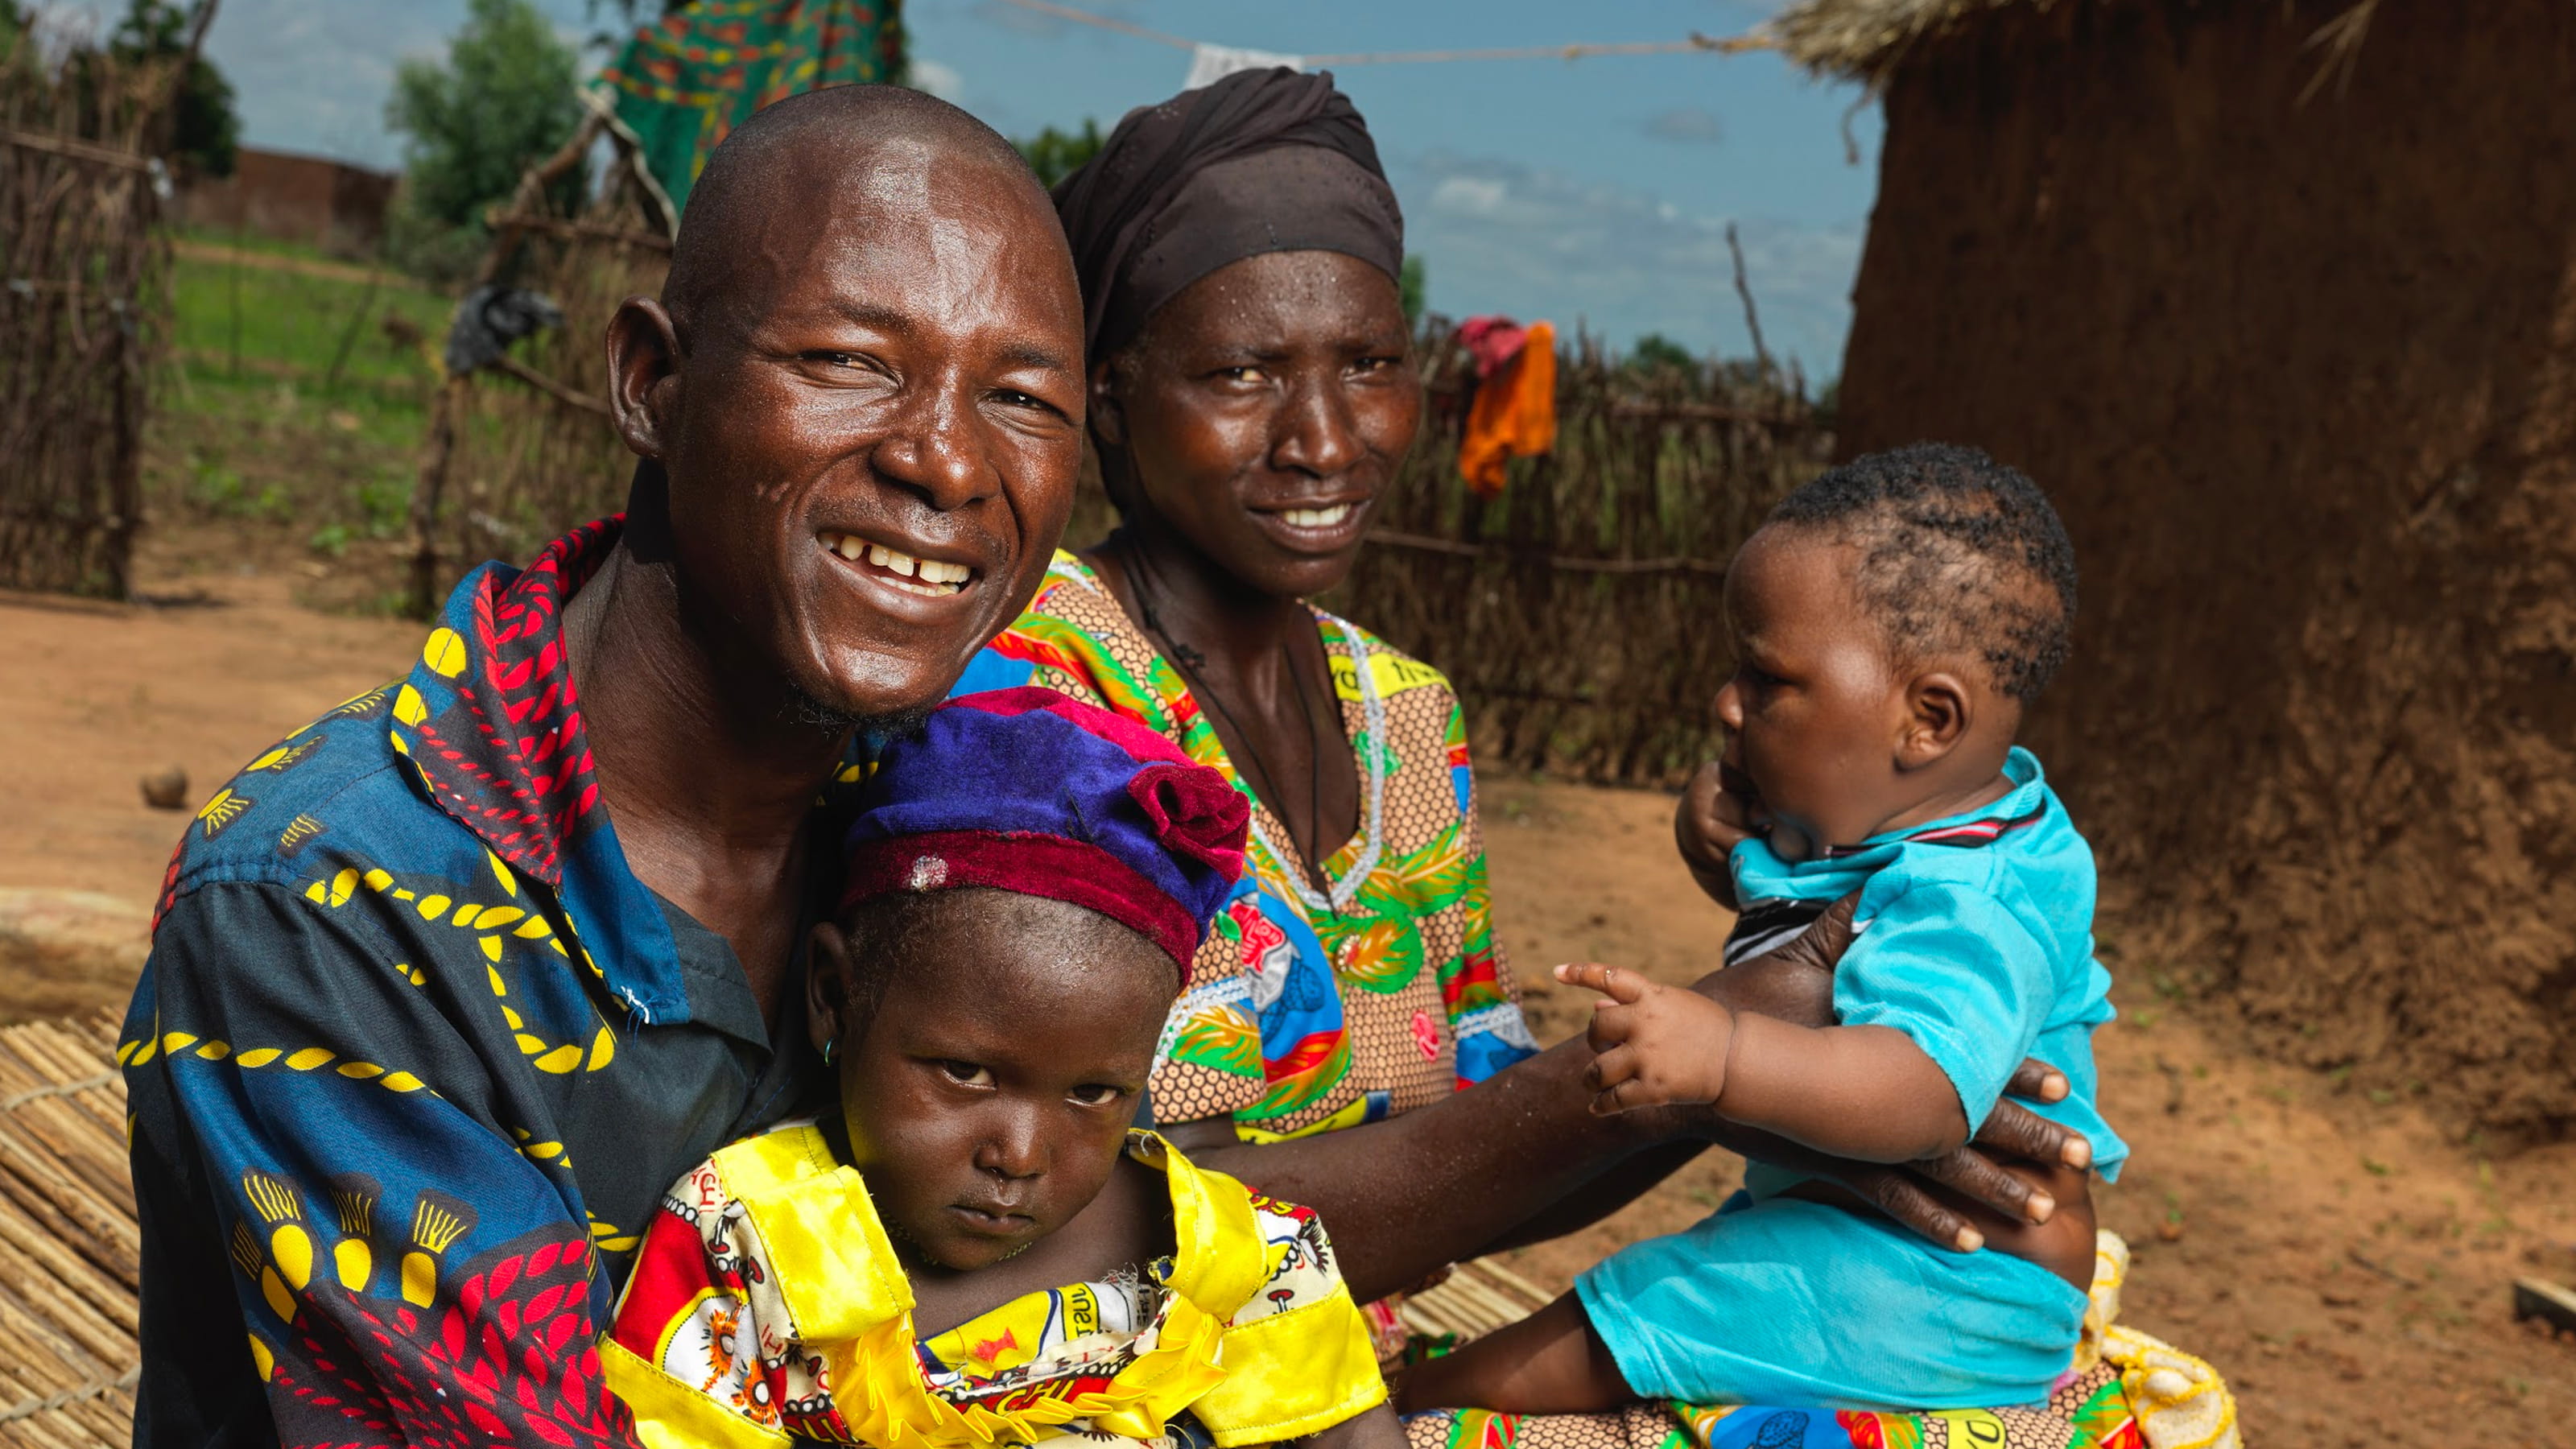 A man and woman are smiling and holding two small children outside a hut.